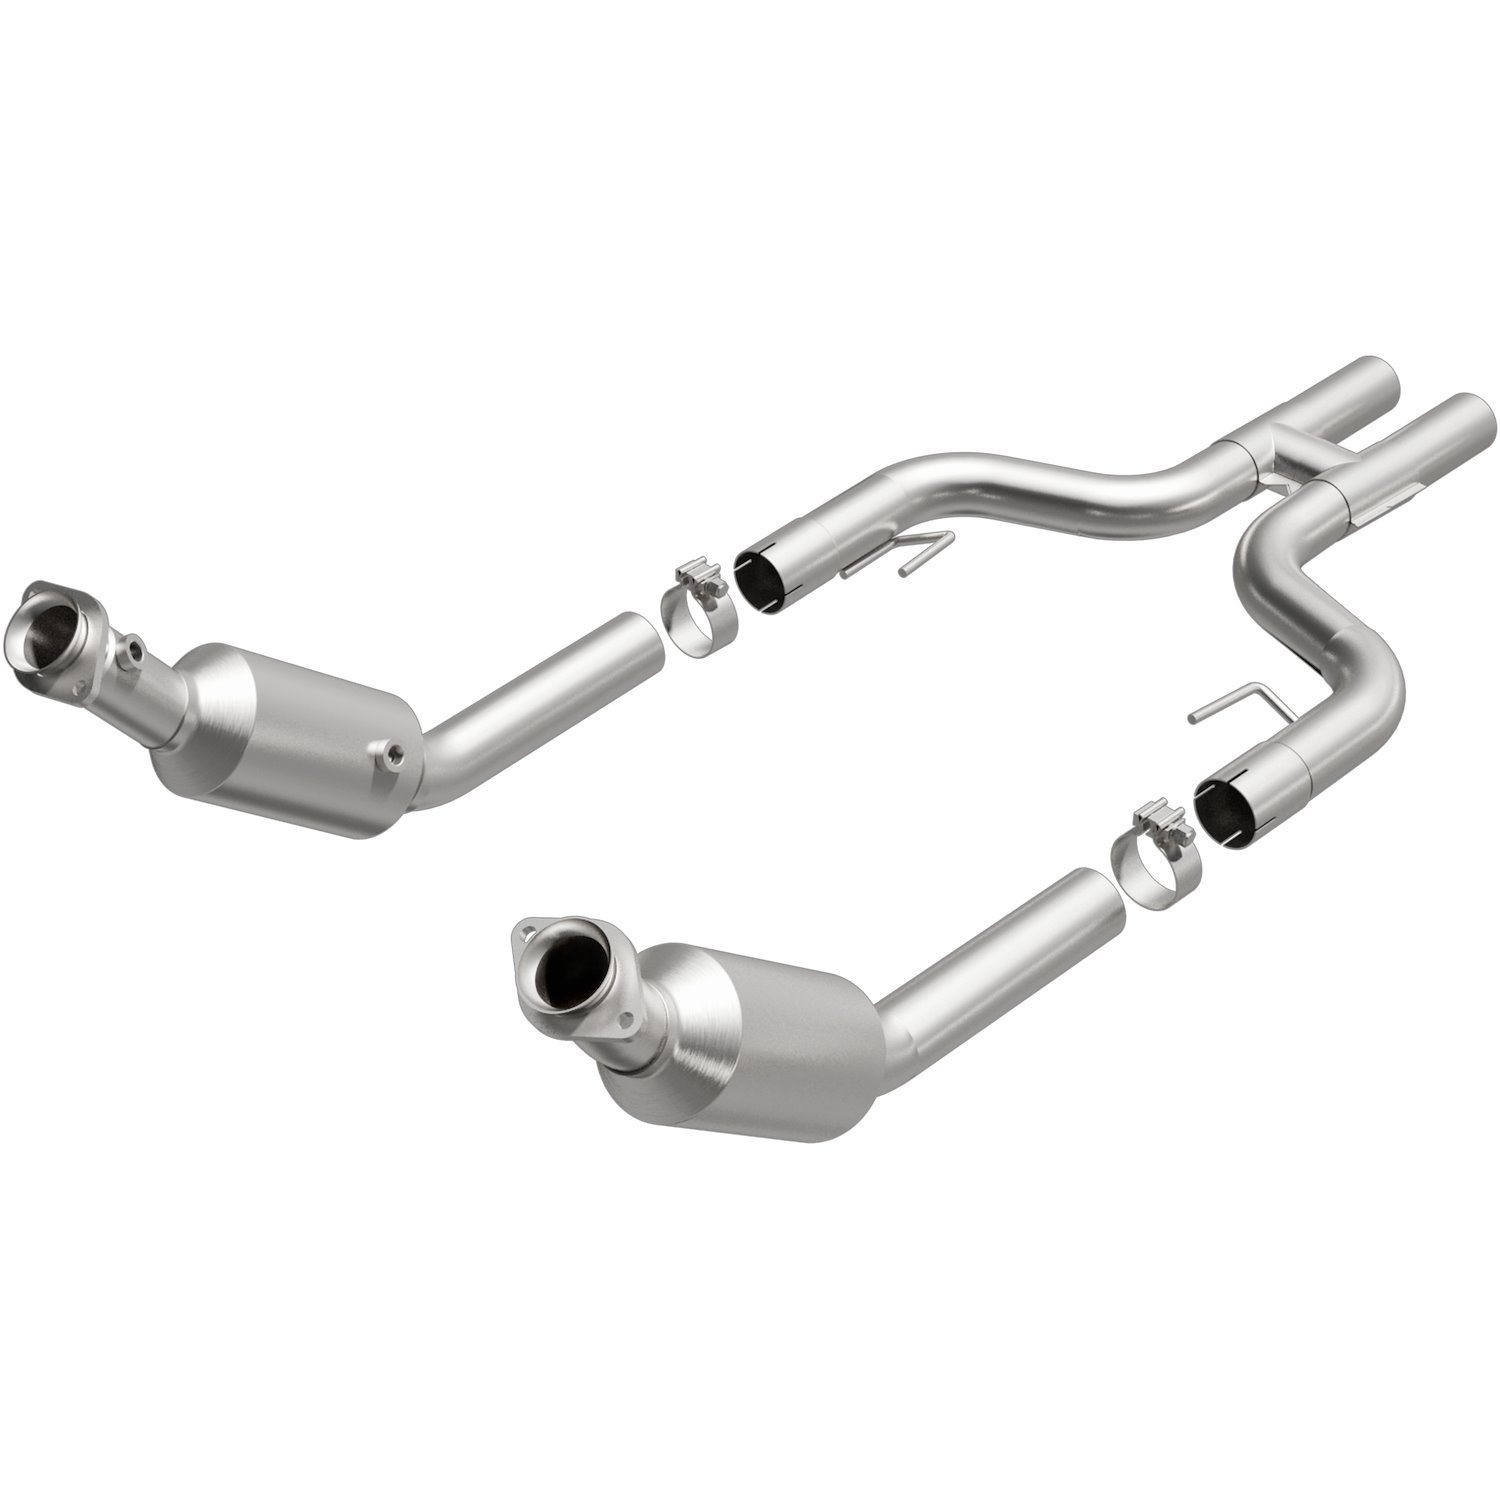 2005-2009 Ford Mustang California Grade CARB Compliant Direct-Fit Catalytic Converter